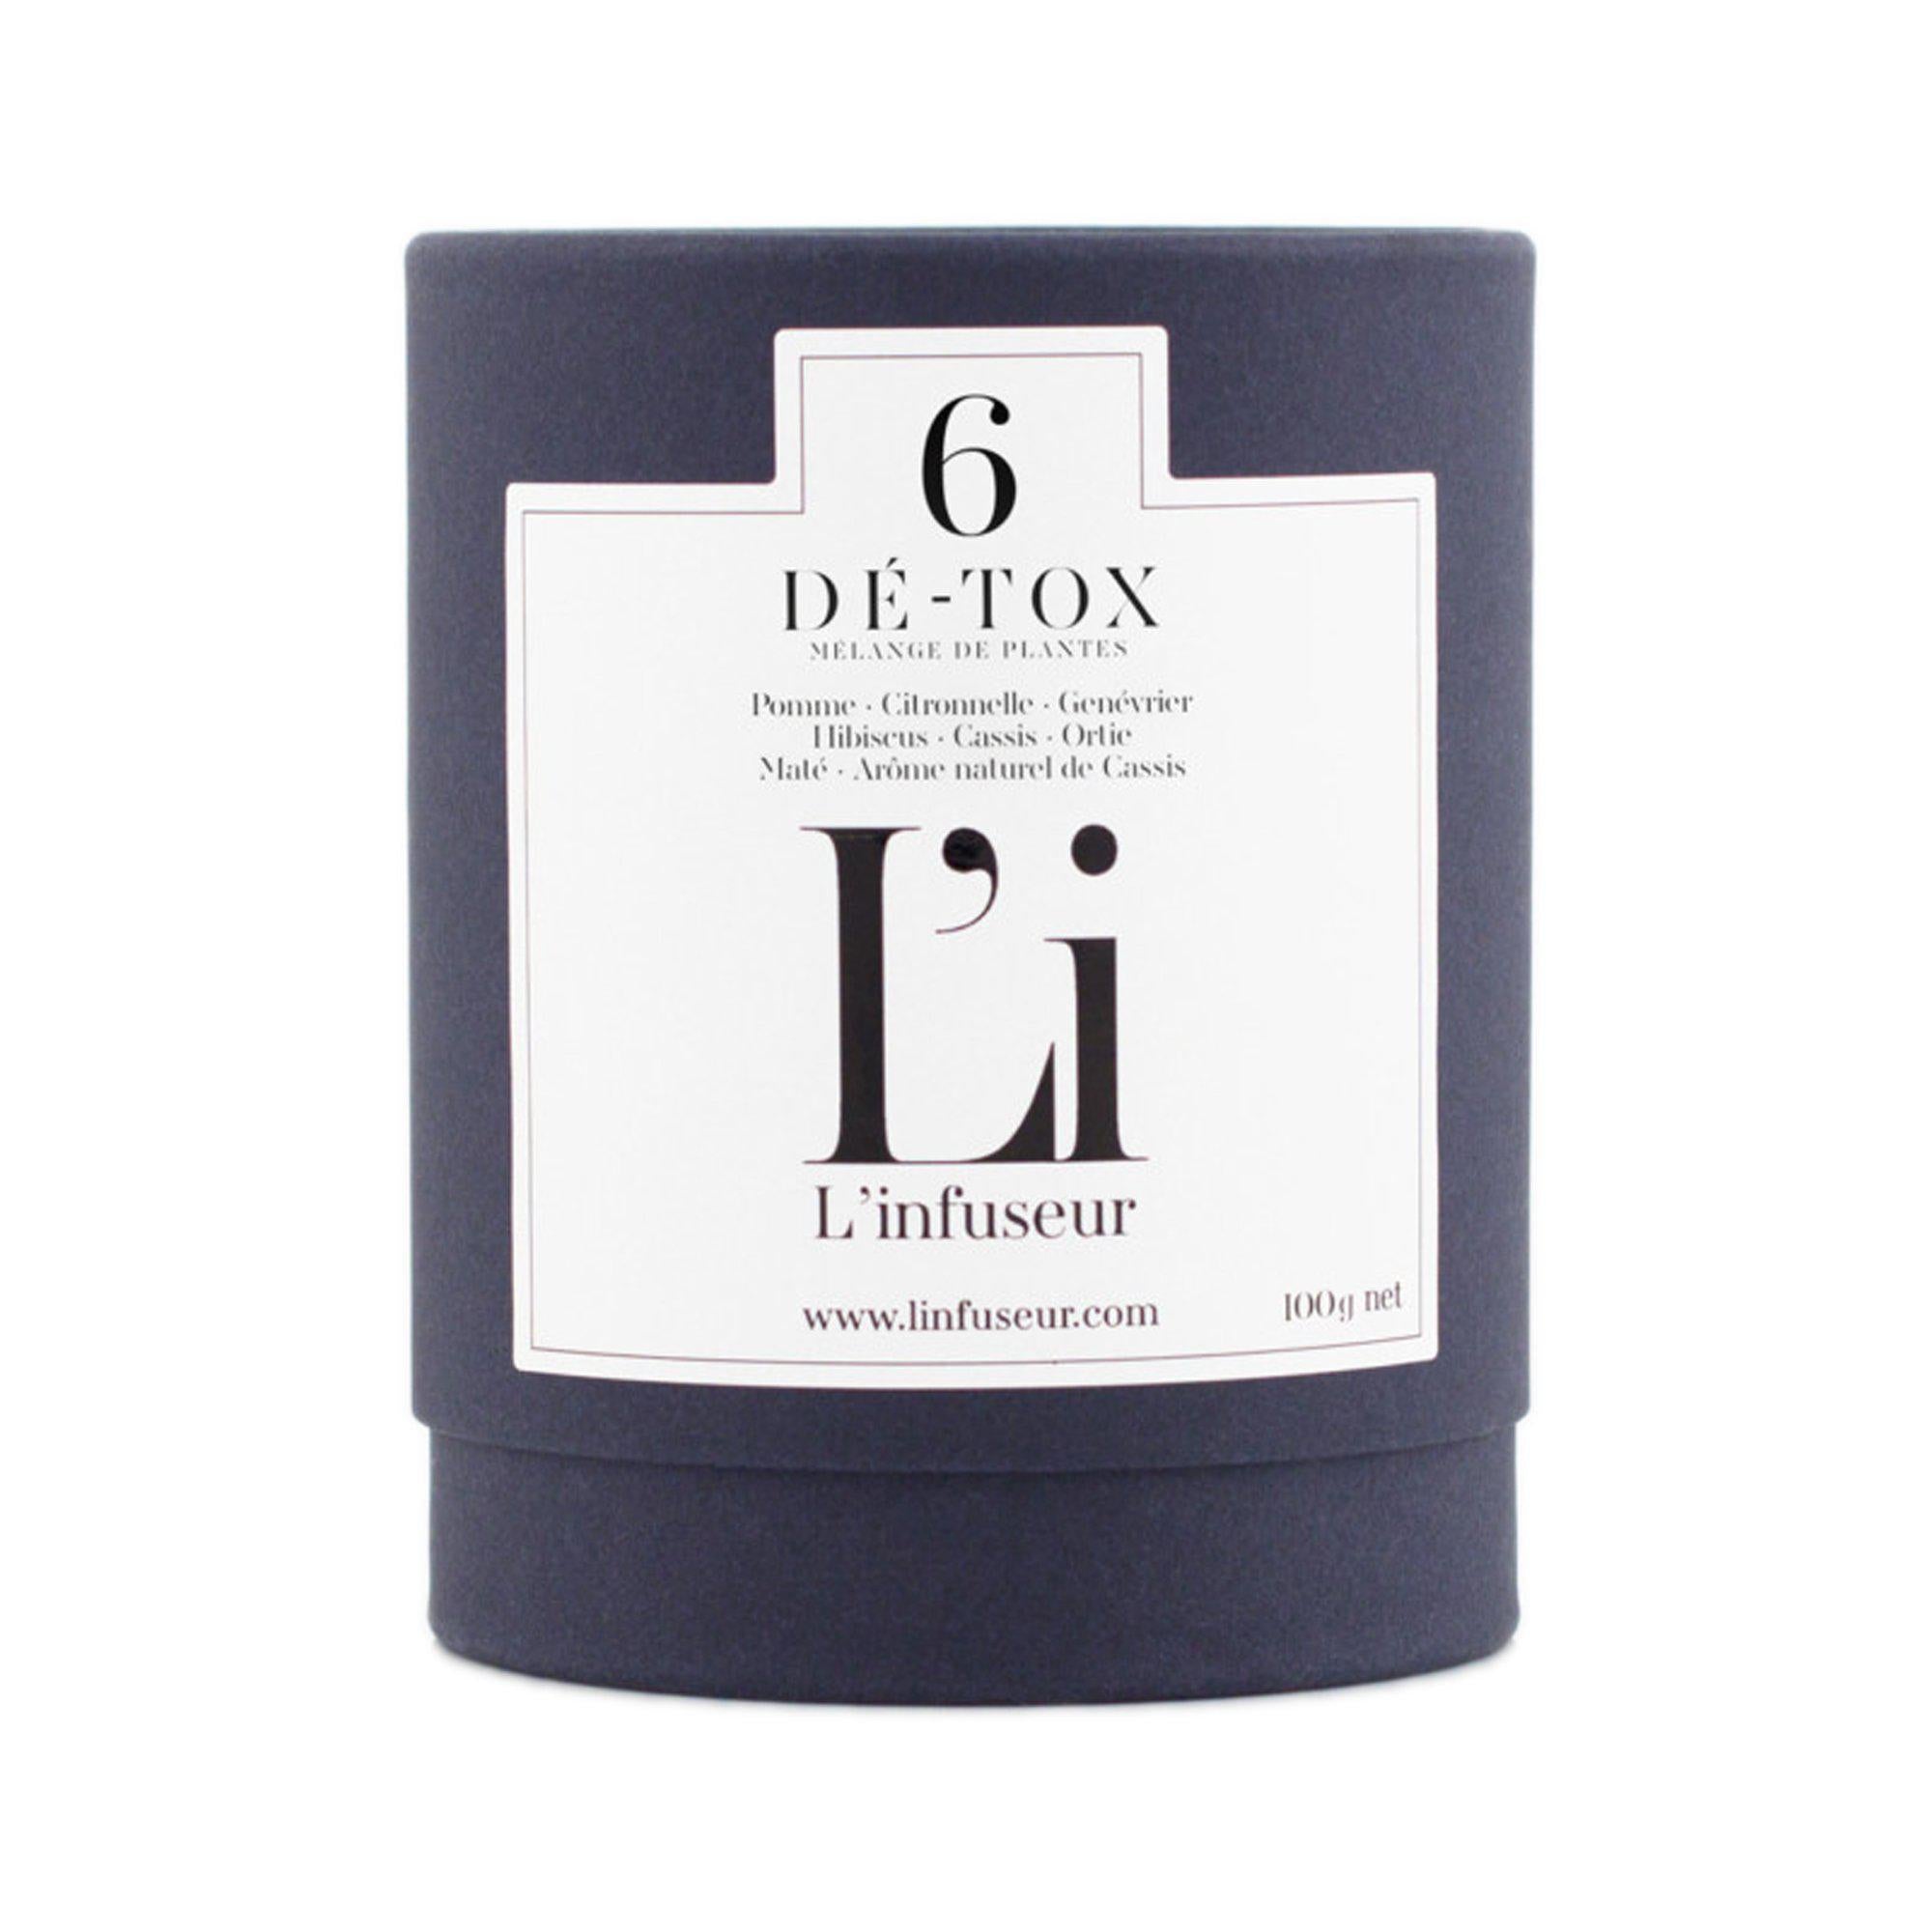 L'infusion n°6 - Dé-tox Infusion n°6 - Detox - L'infuseur